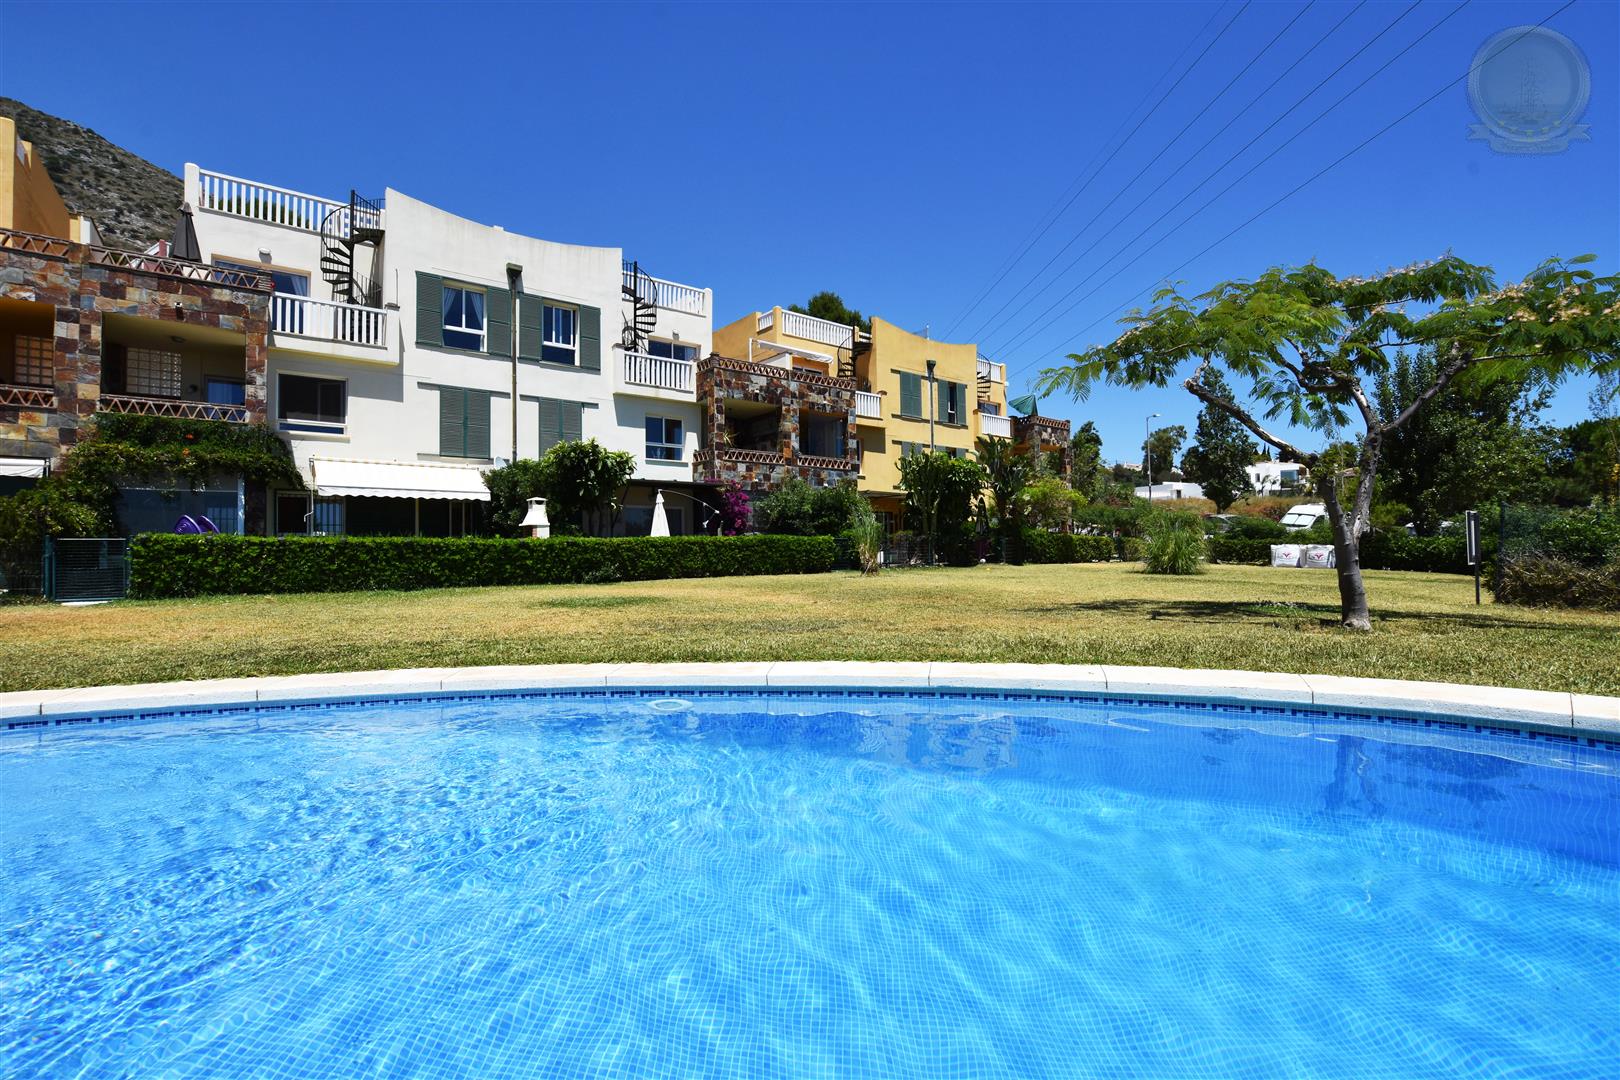 Apartment for Sale in Higueron community pool